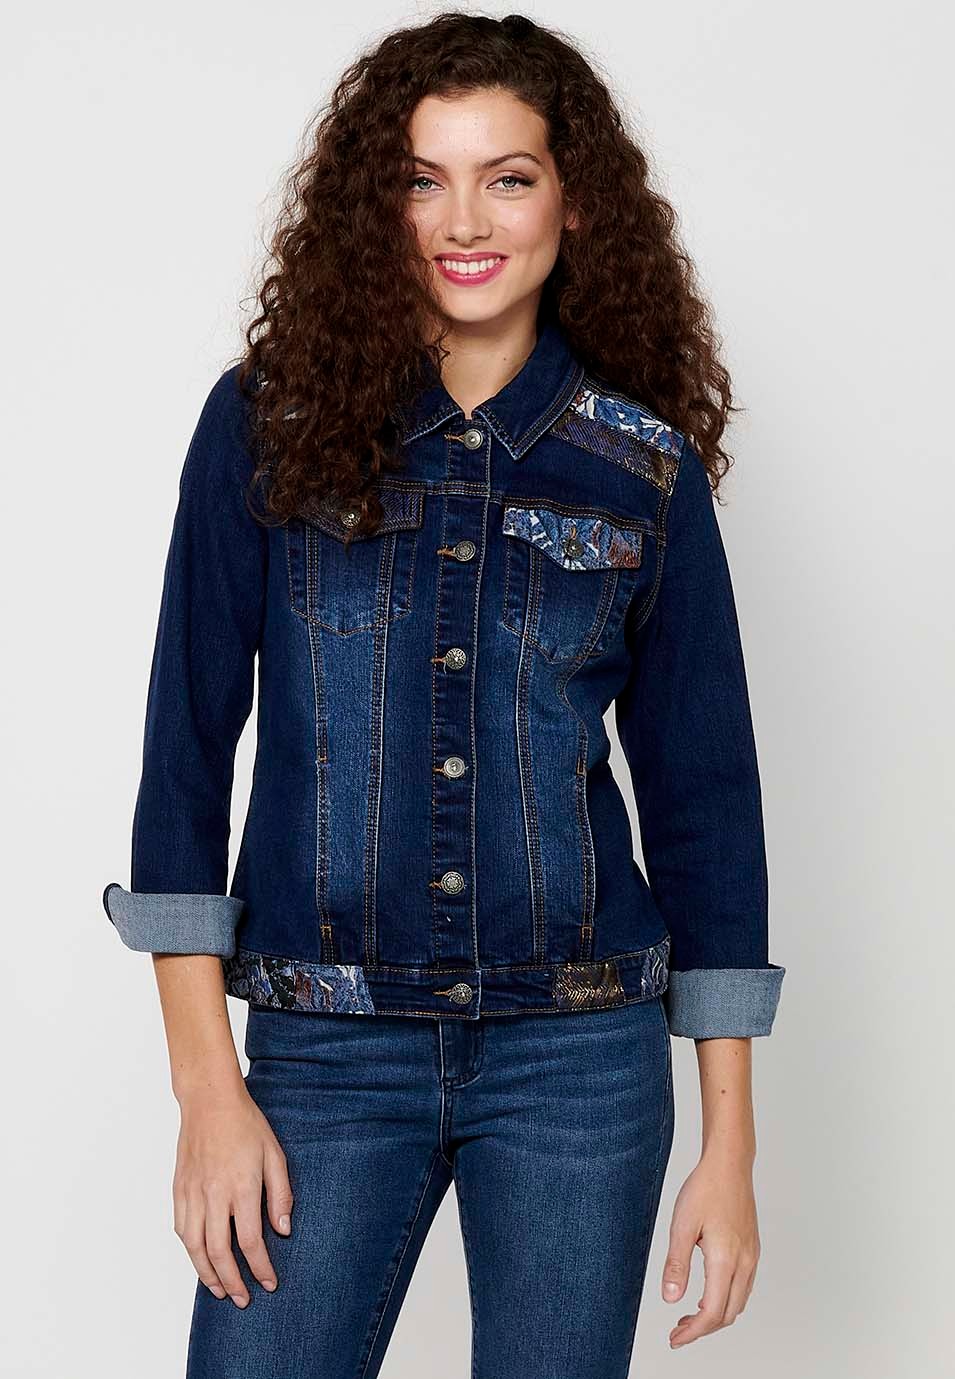 Dark Blue Long Sleeve Denim Jacket with Button Front Closure and Pockets with Embroidery on the Shoulders for Women